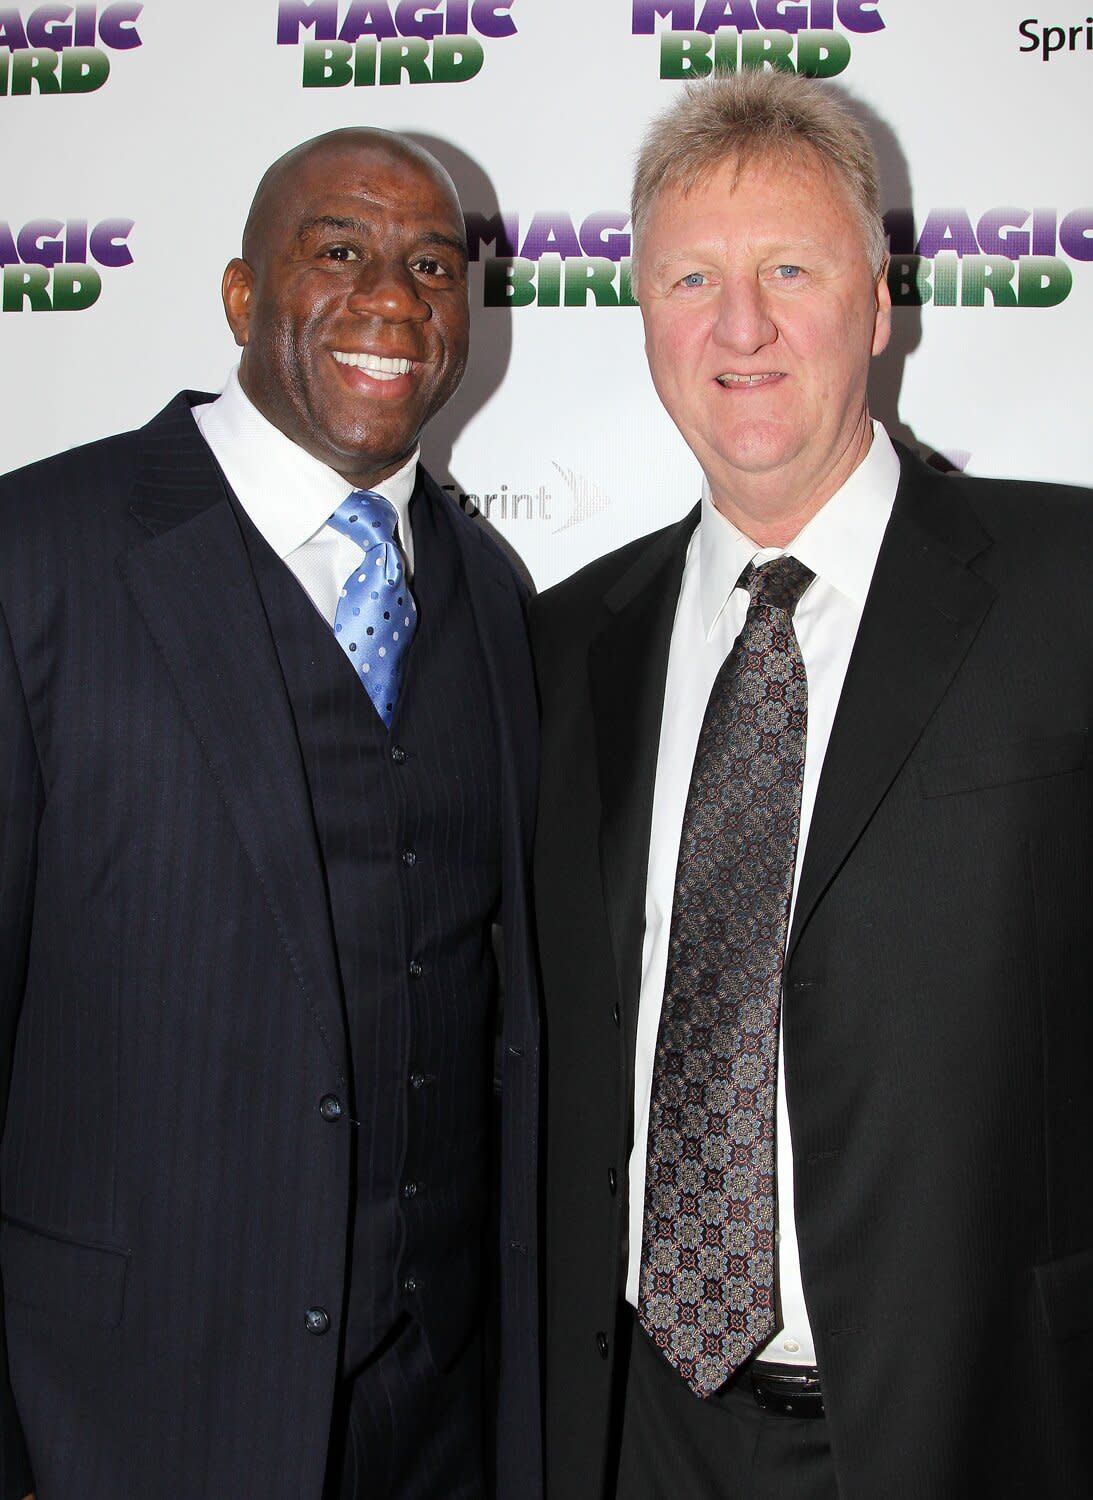 Magic Johnson and Larry Bird attend the "Magic/Bird" Broadway opening night at the Longacre Theatre on April 11, 2012 in New York City.